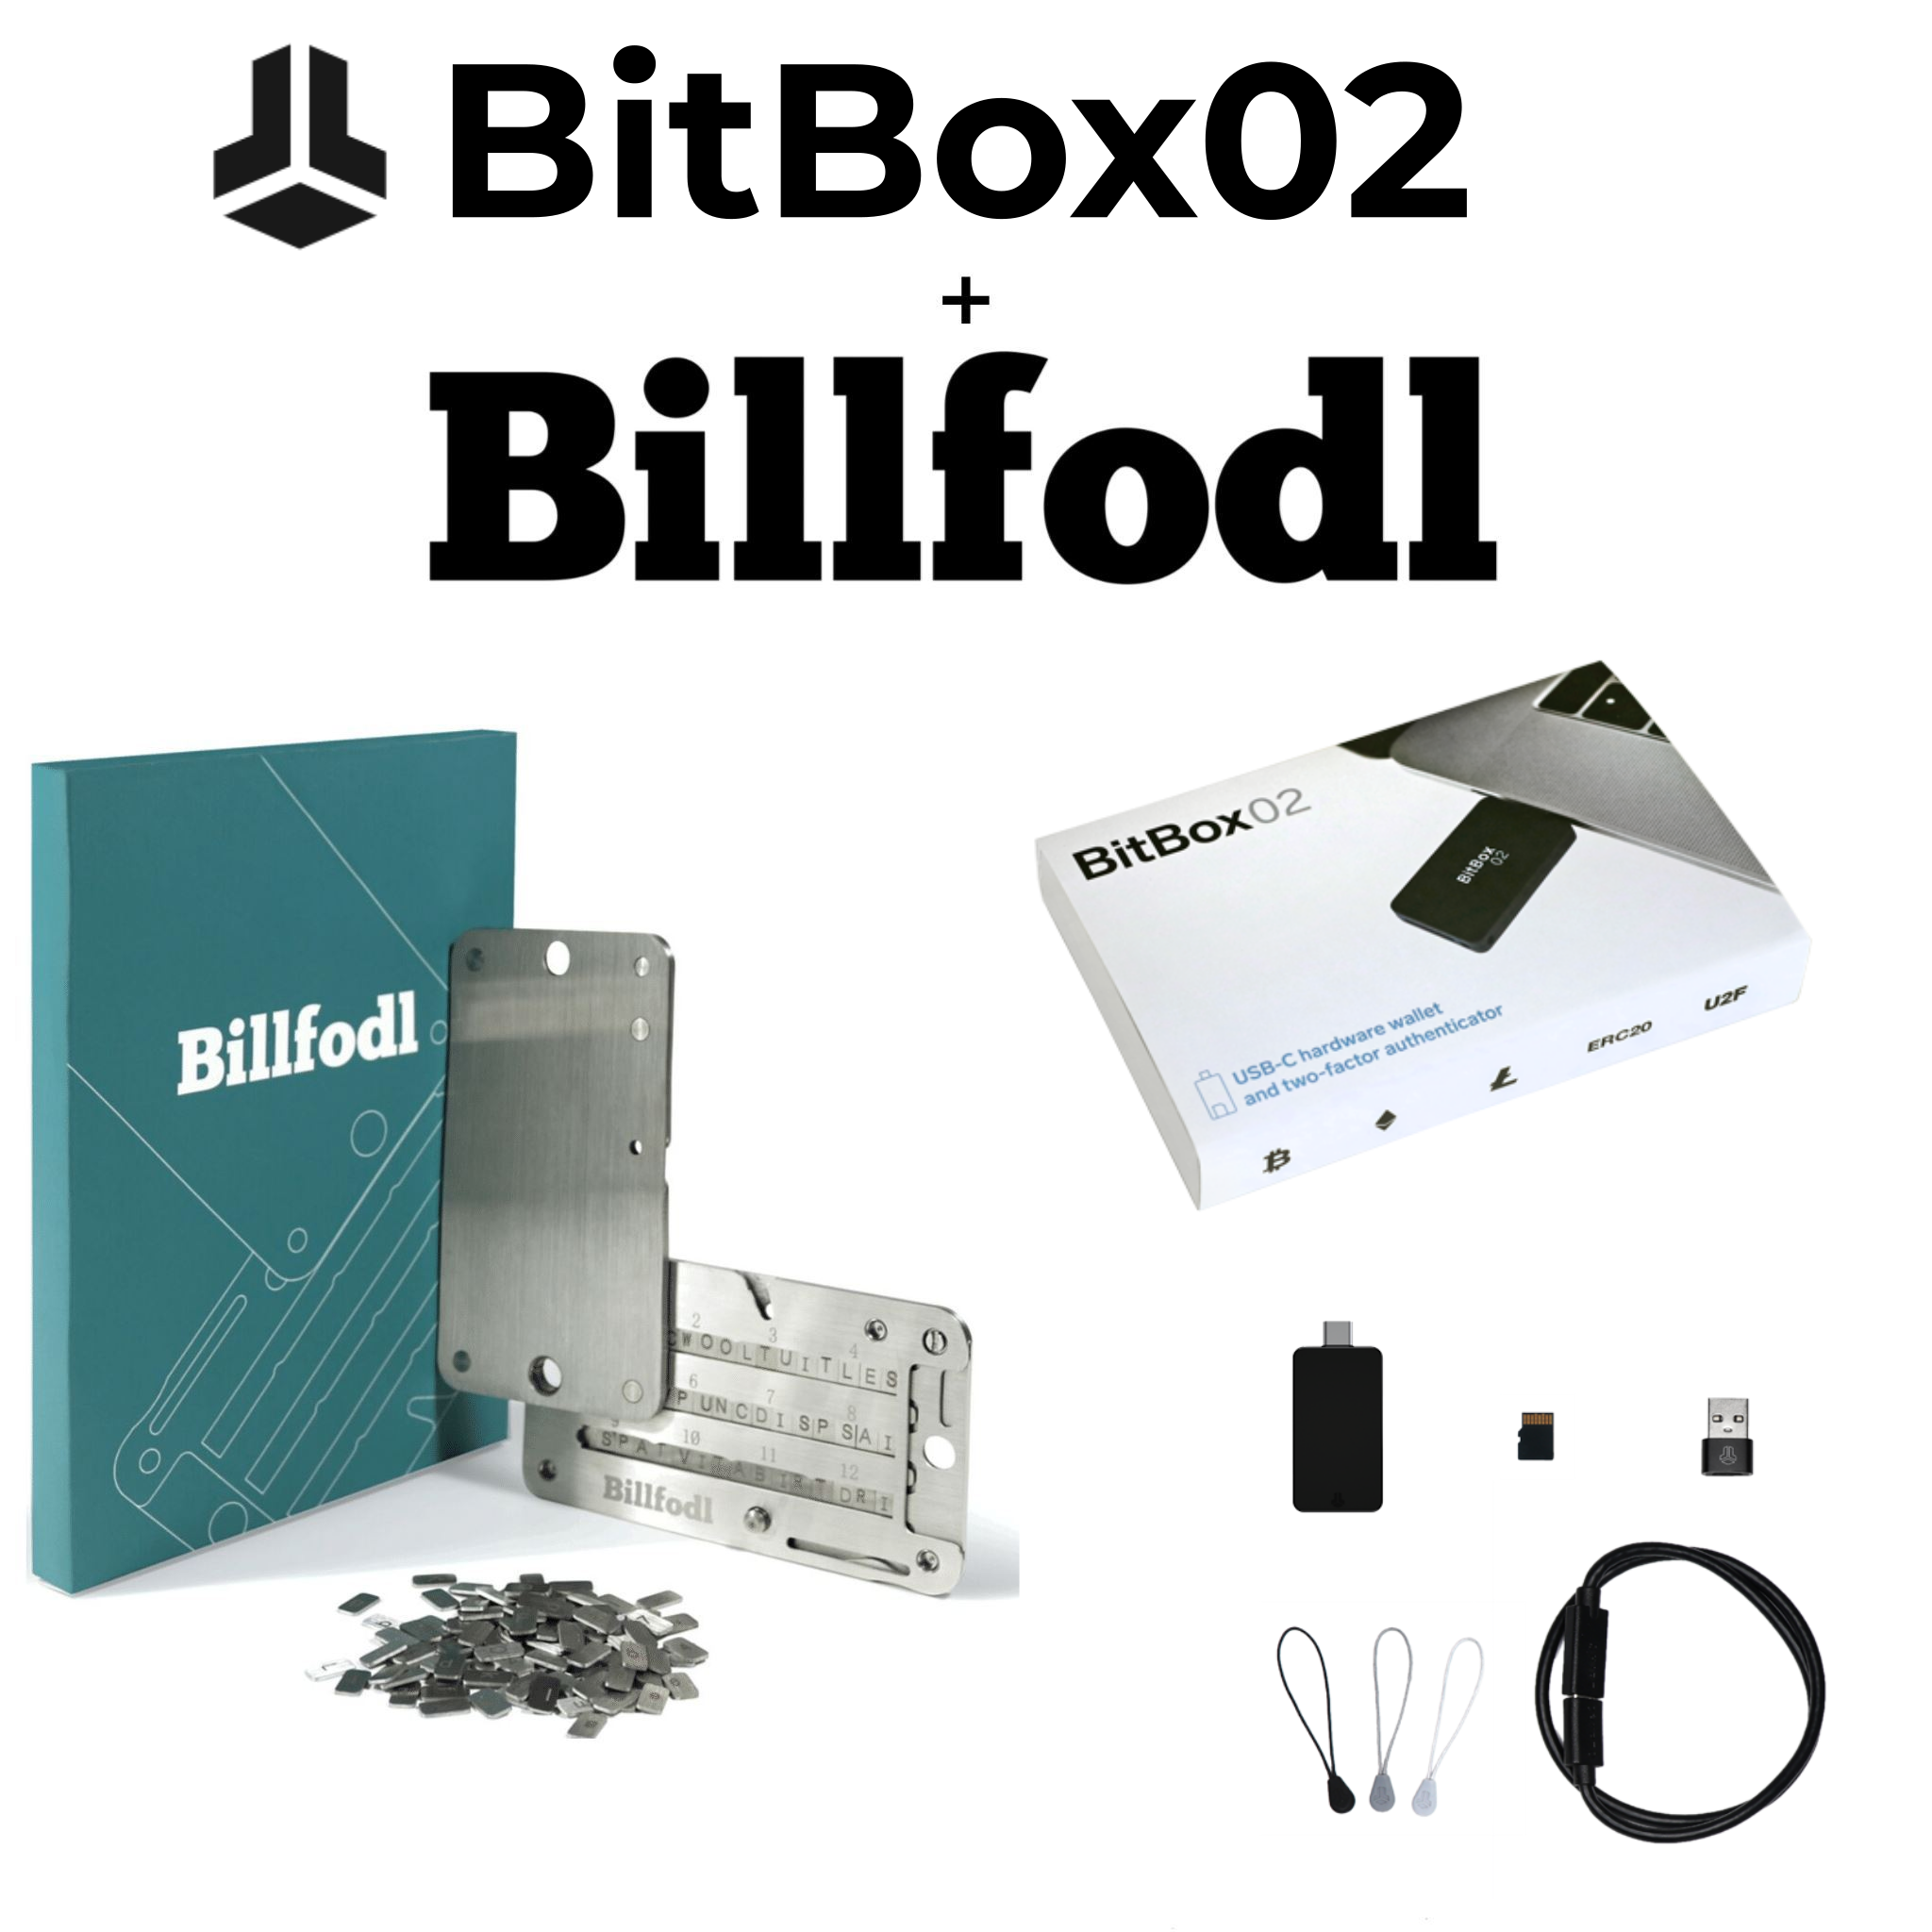 BitBox02 (Multi-Coin) and Billfodl Box Contents